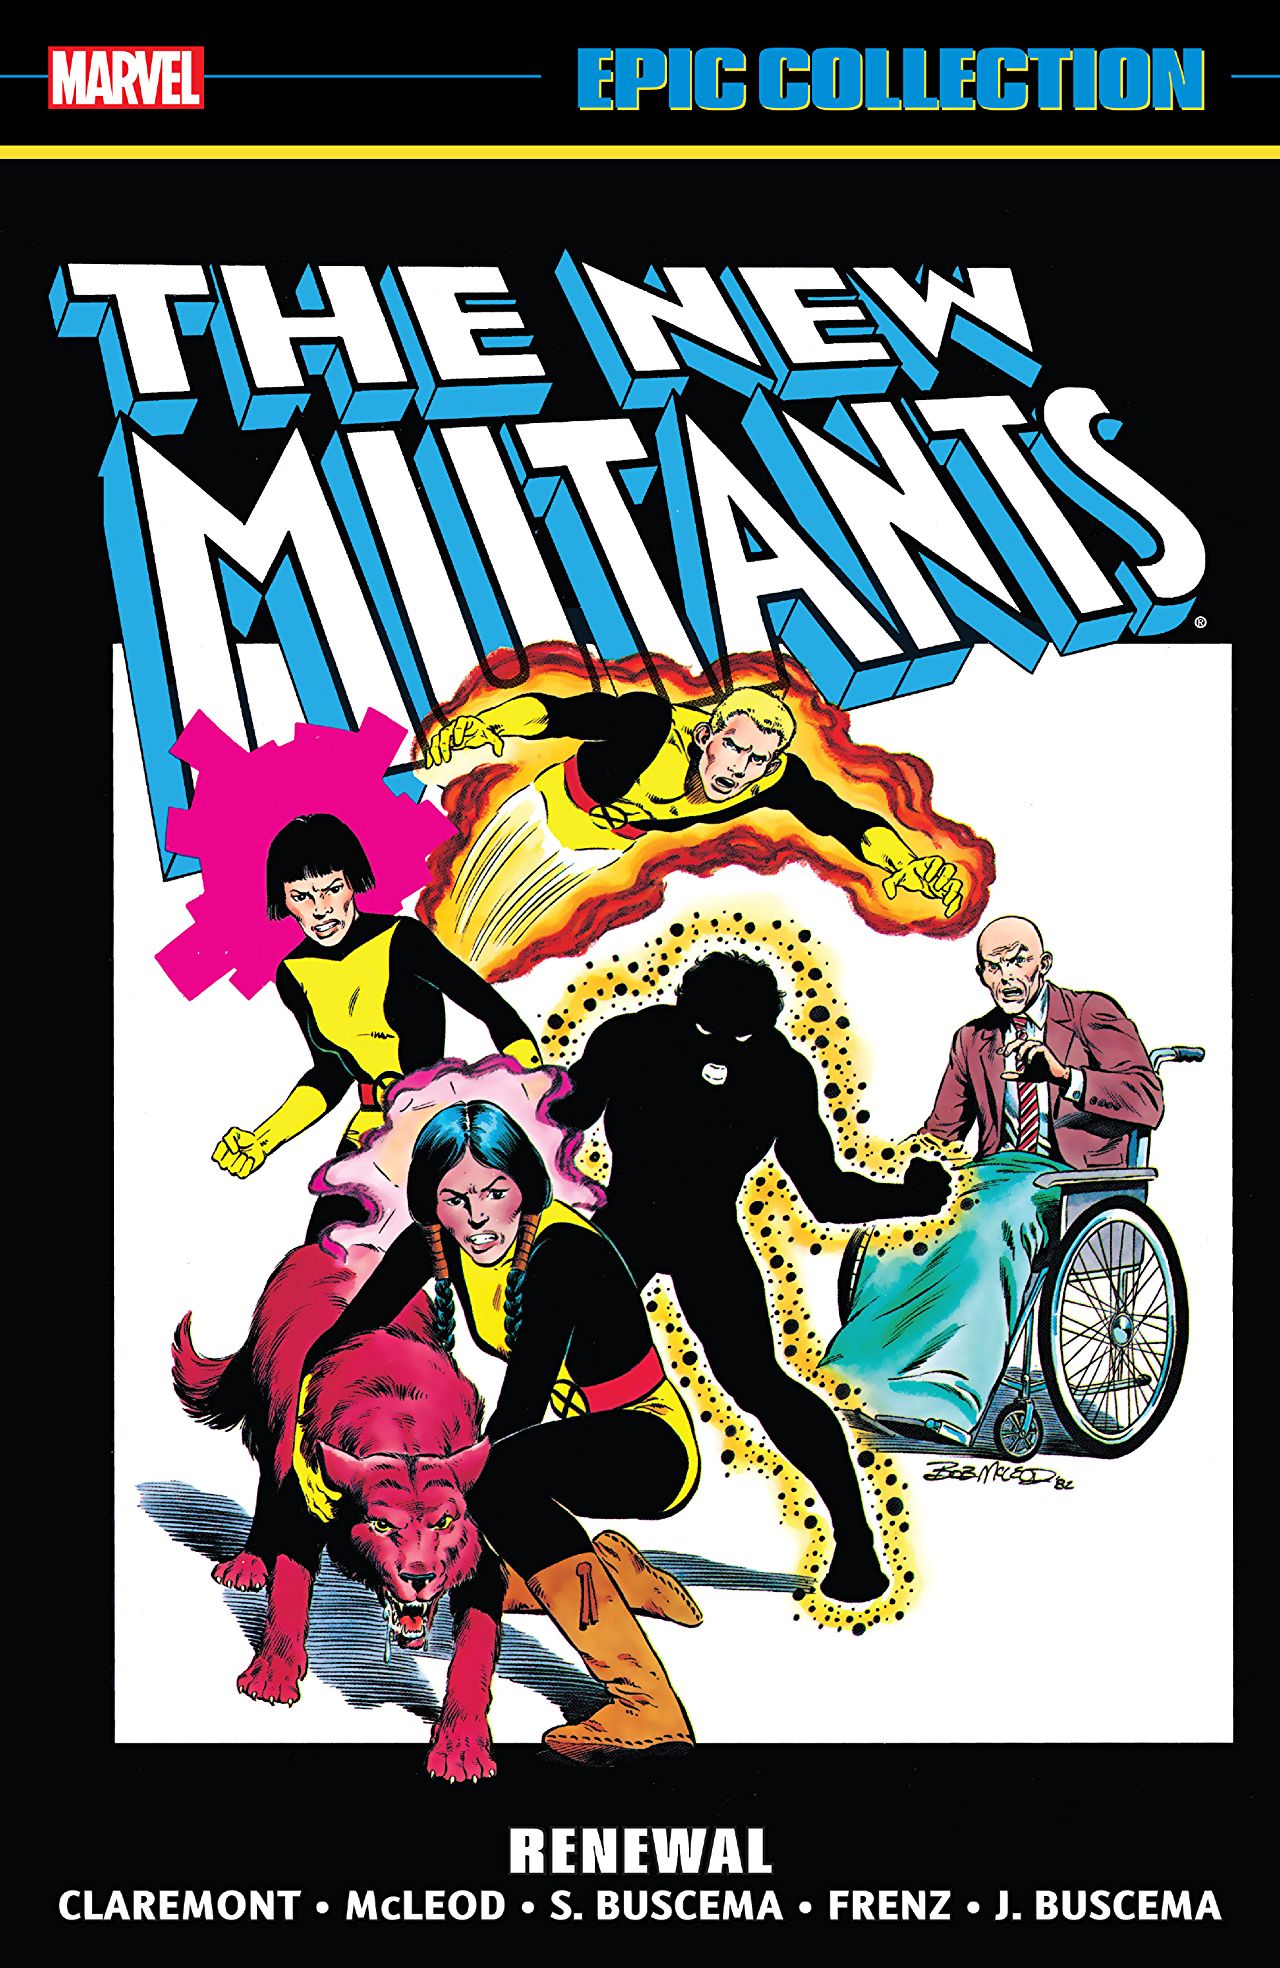 New Mutants Epic Collection Graphic Novel Volume 1 Renewal [2020 Printing]